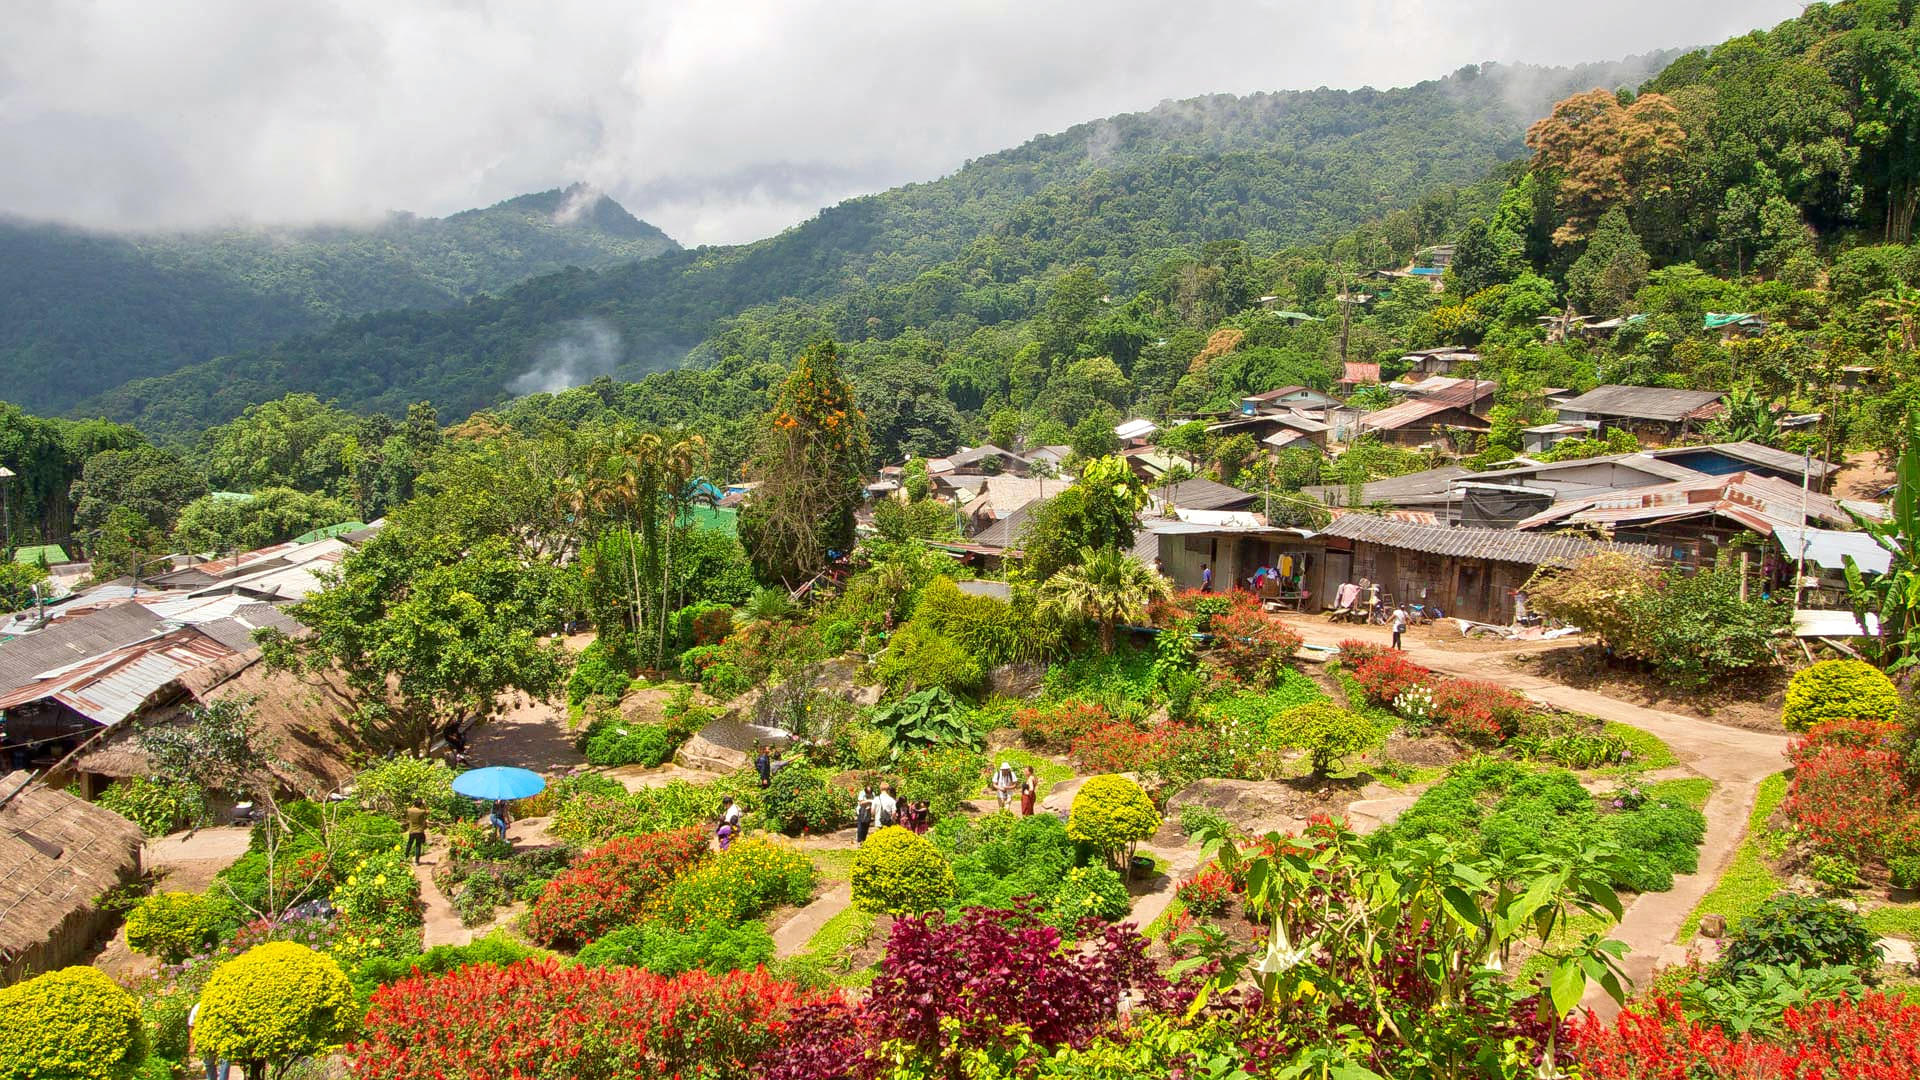 Hmong Village Overview